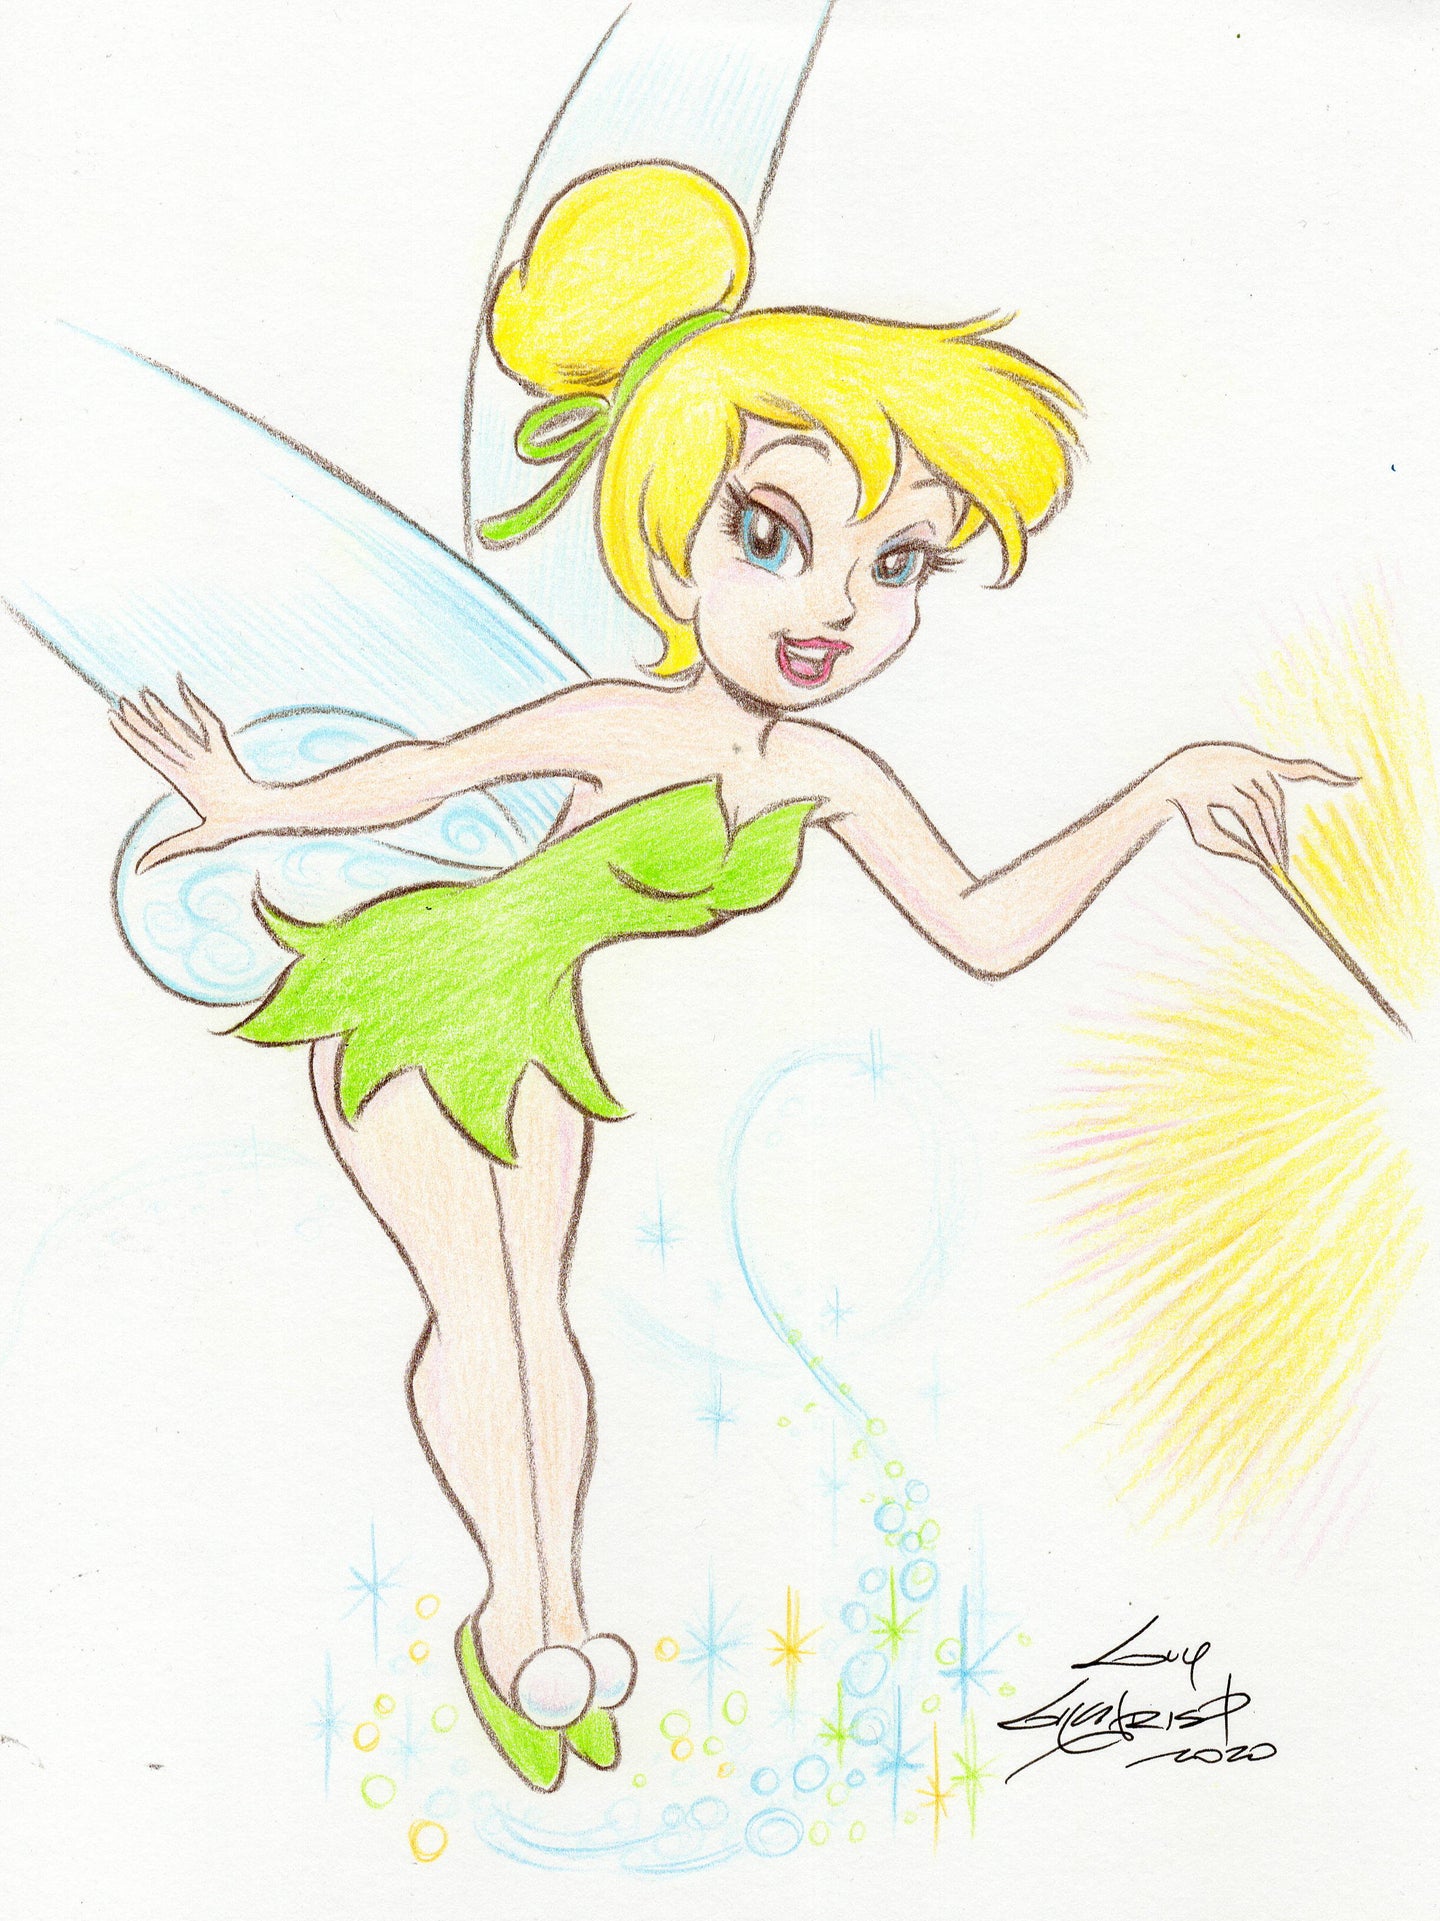 Tinker Bell original 1/1 8.5 x 11 Sketch - Created by Guy Gilchrist